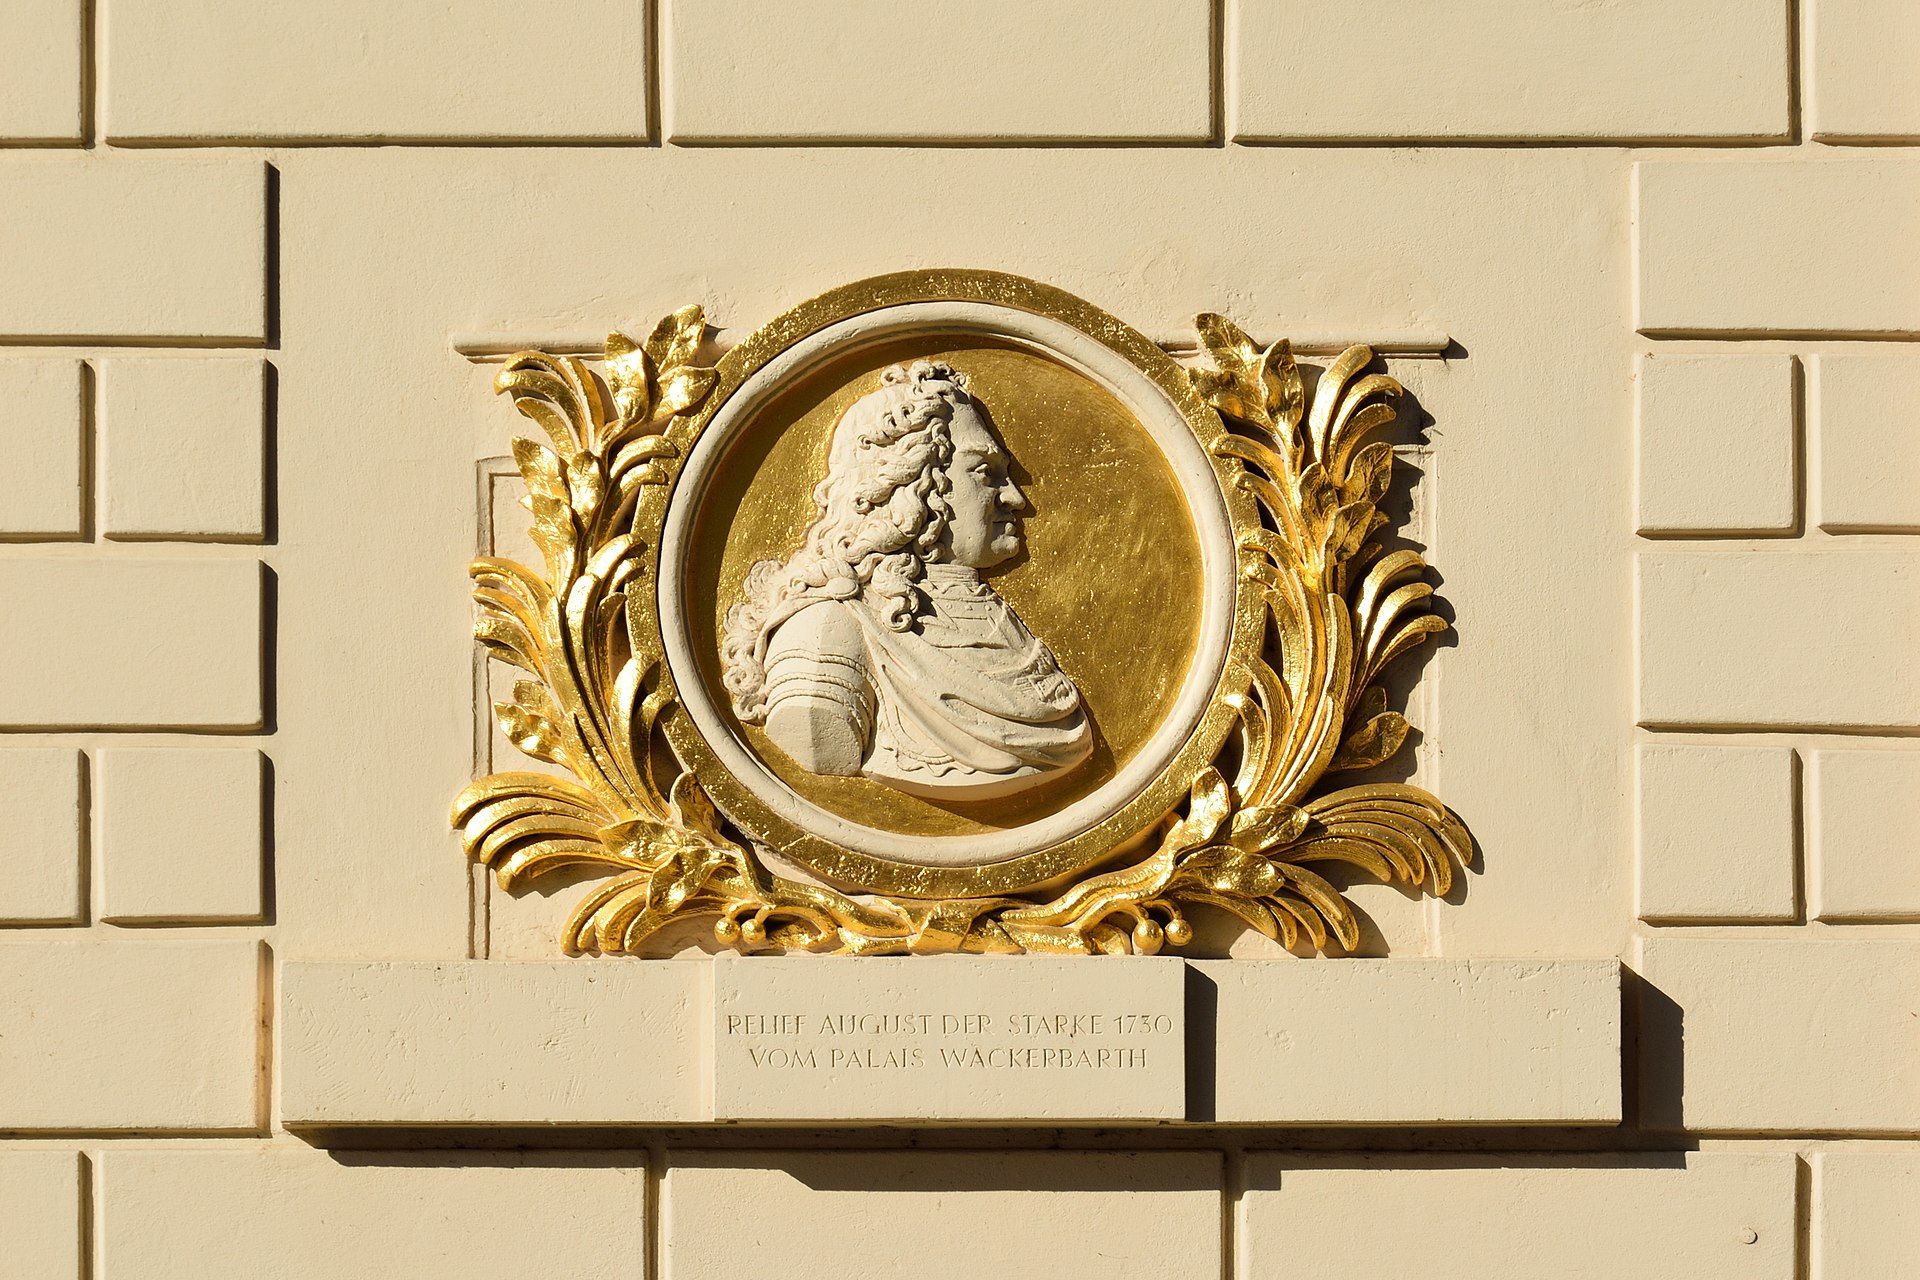 Relief depicting August II the Strong at the Johanneum in Dresden